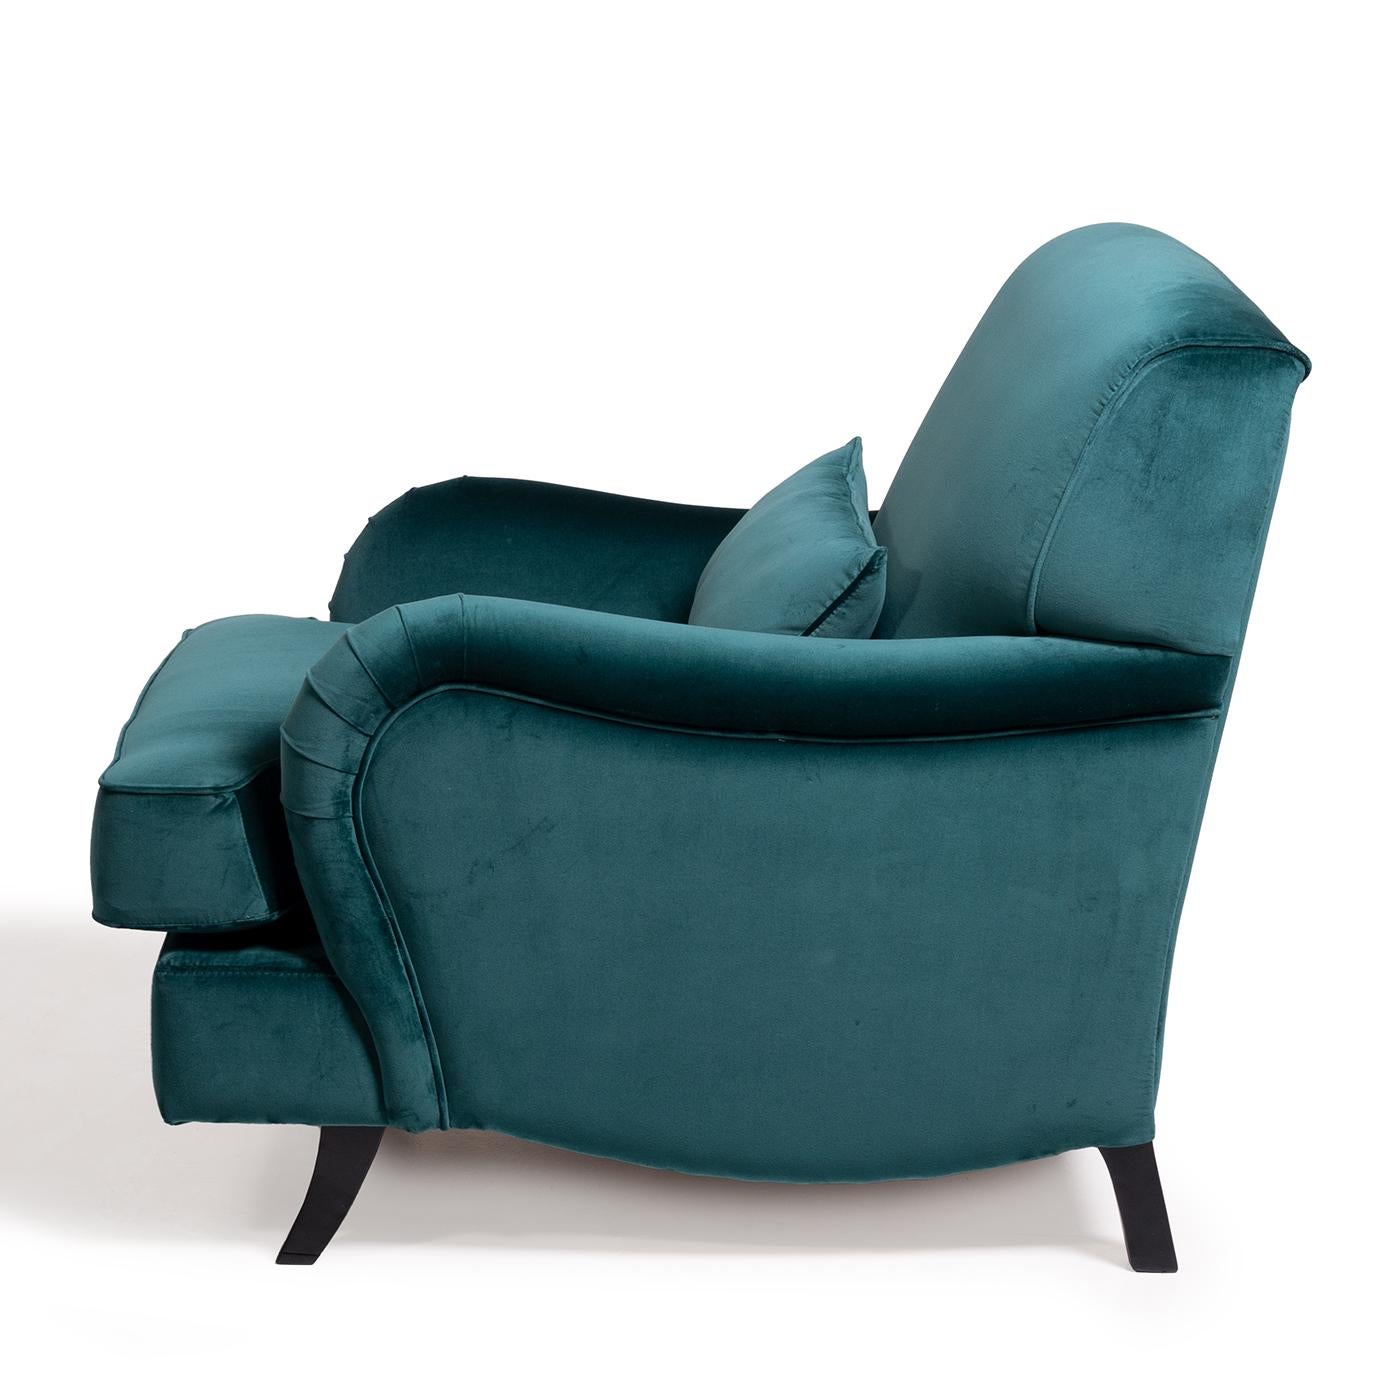 The Bernini armchair, from Couture Collection, is an English model re-edited with flying cushions and fixed back, finished in grosgrain. Extremely saddled armrests, cushions for lumbar support, also finished in grosgrain, create visual